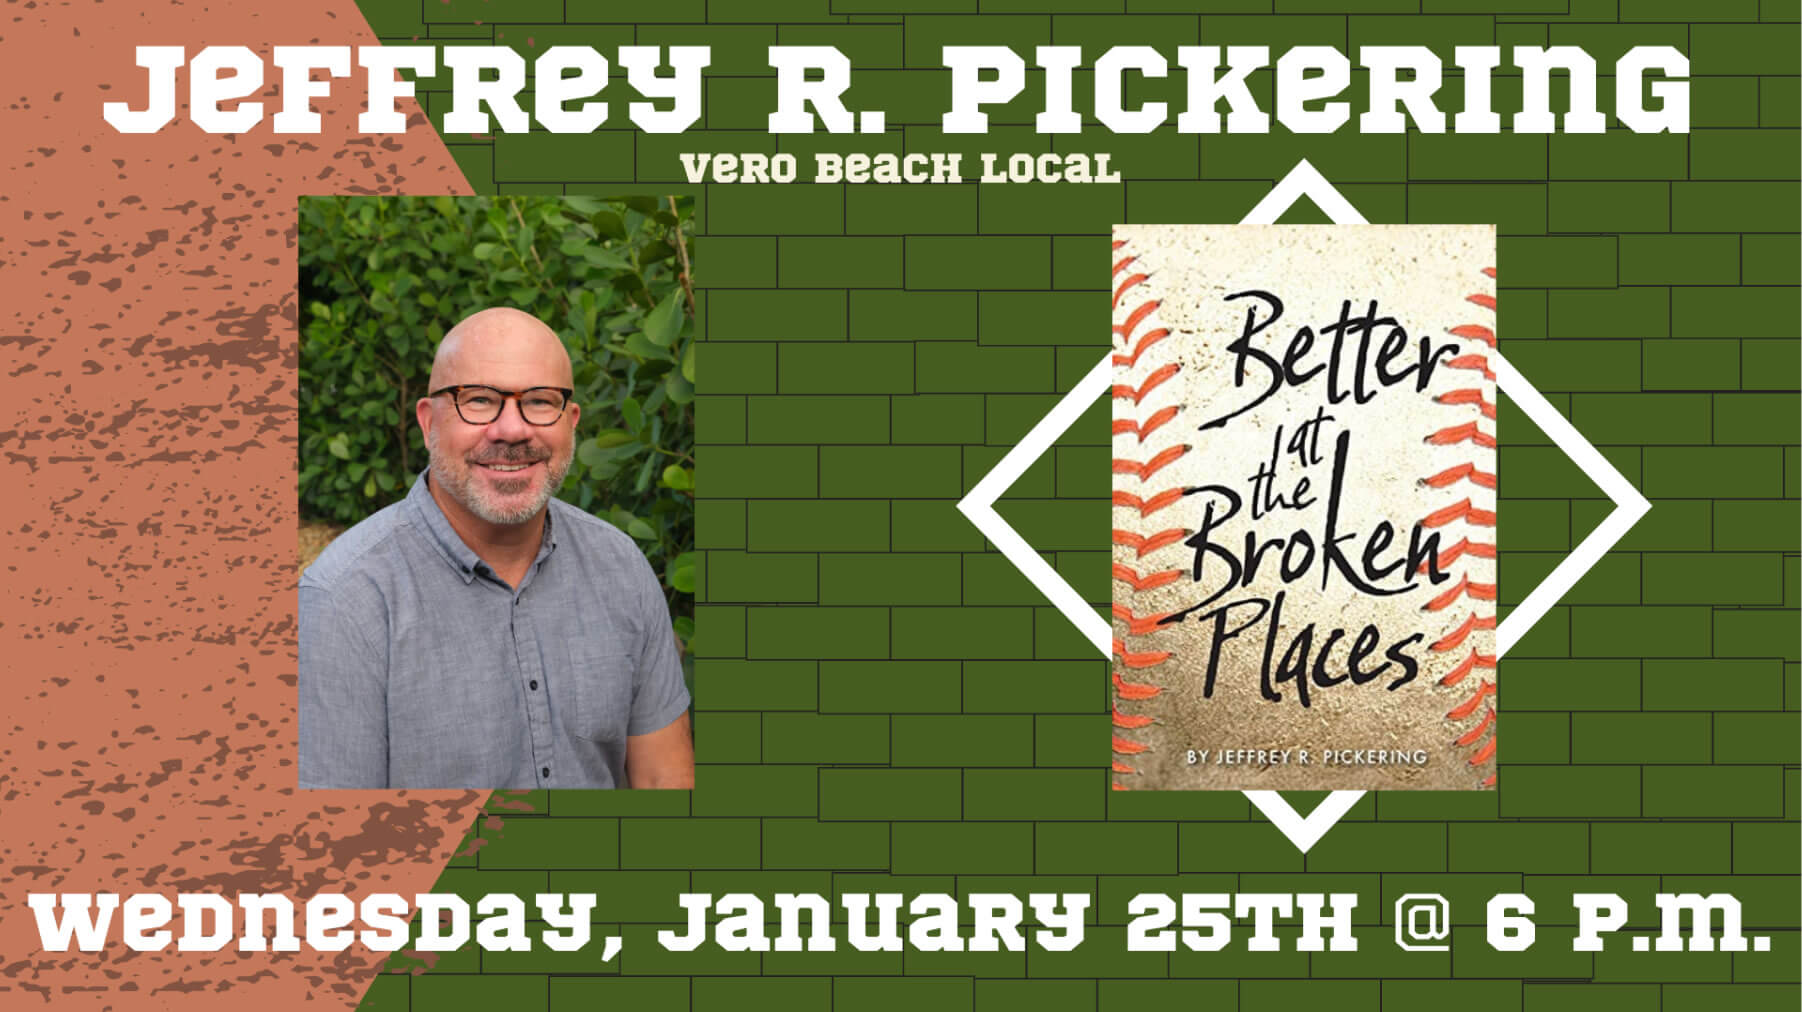 Jeffrey R. Pickering presenting Better At The Broken Places